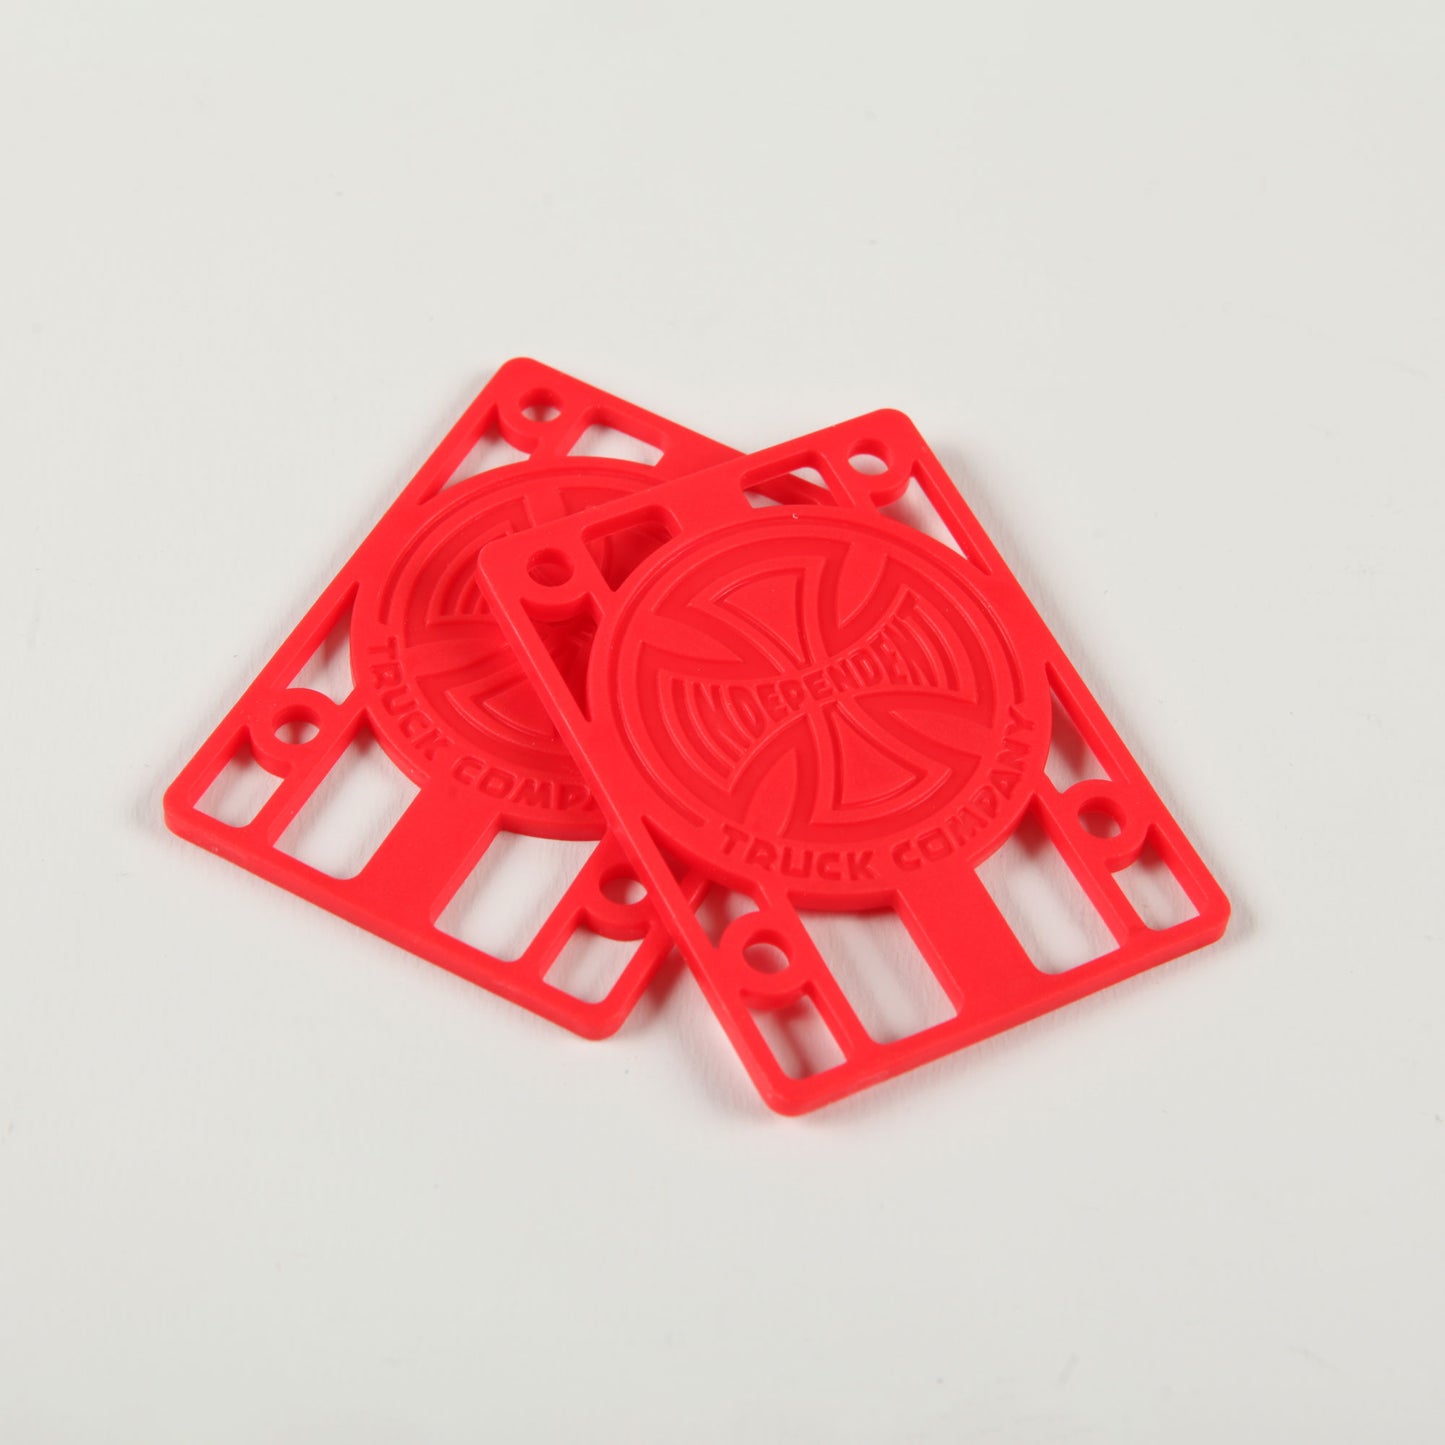 Independent 1/8" Riser Pads (Red)